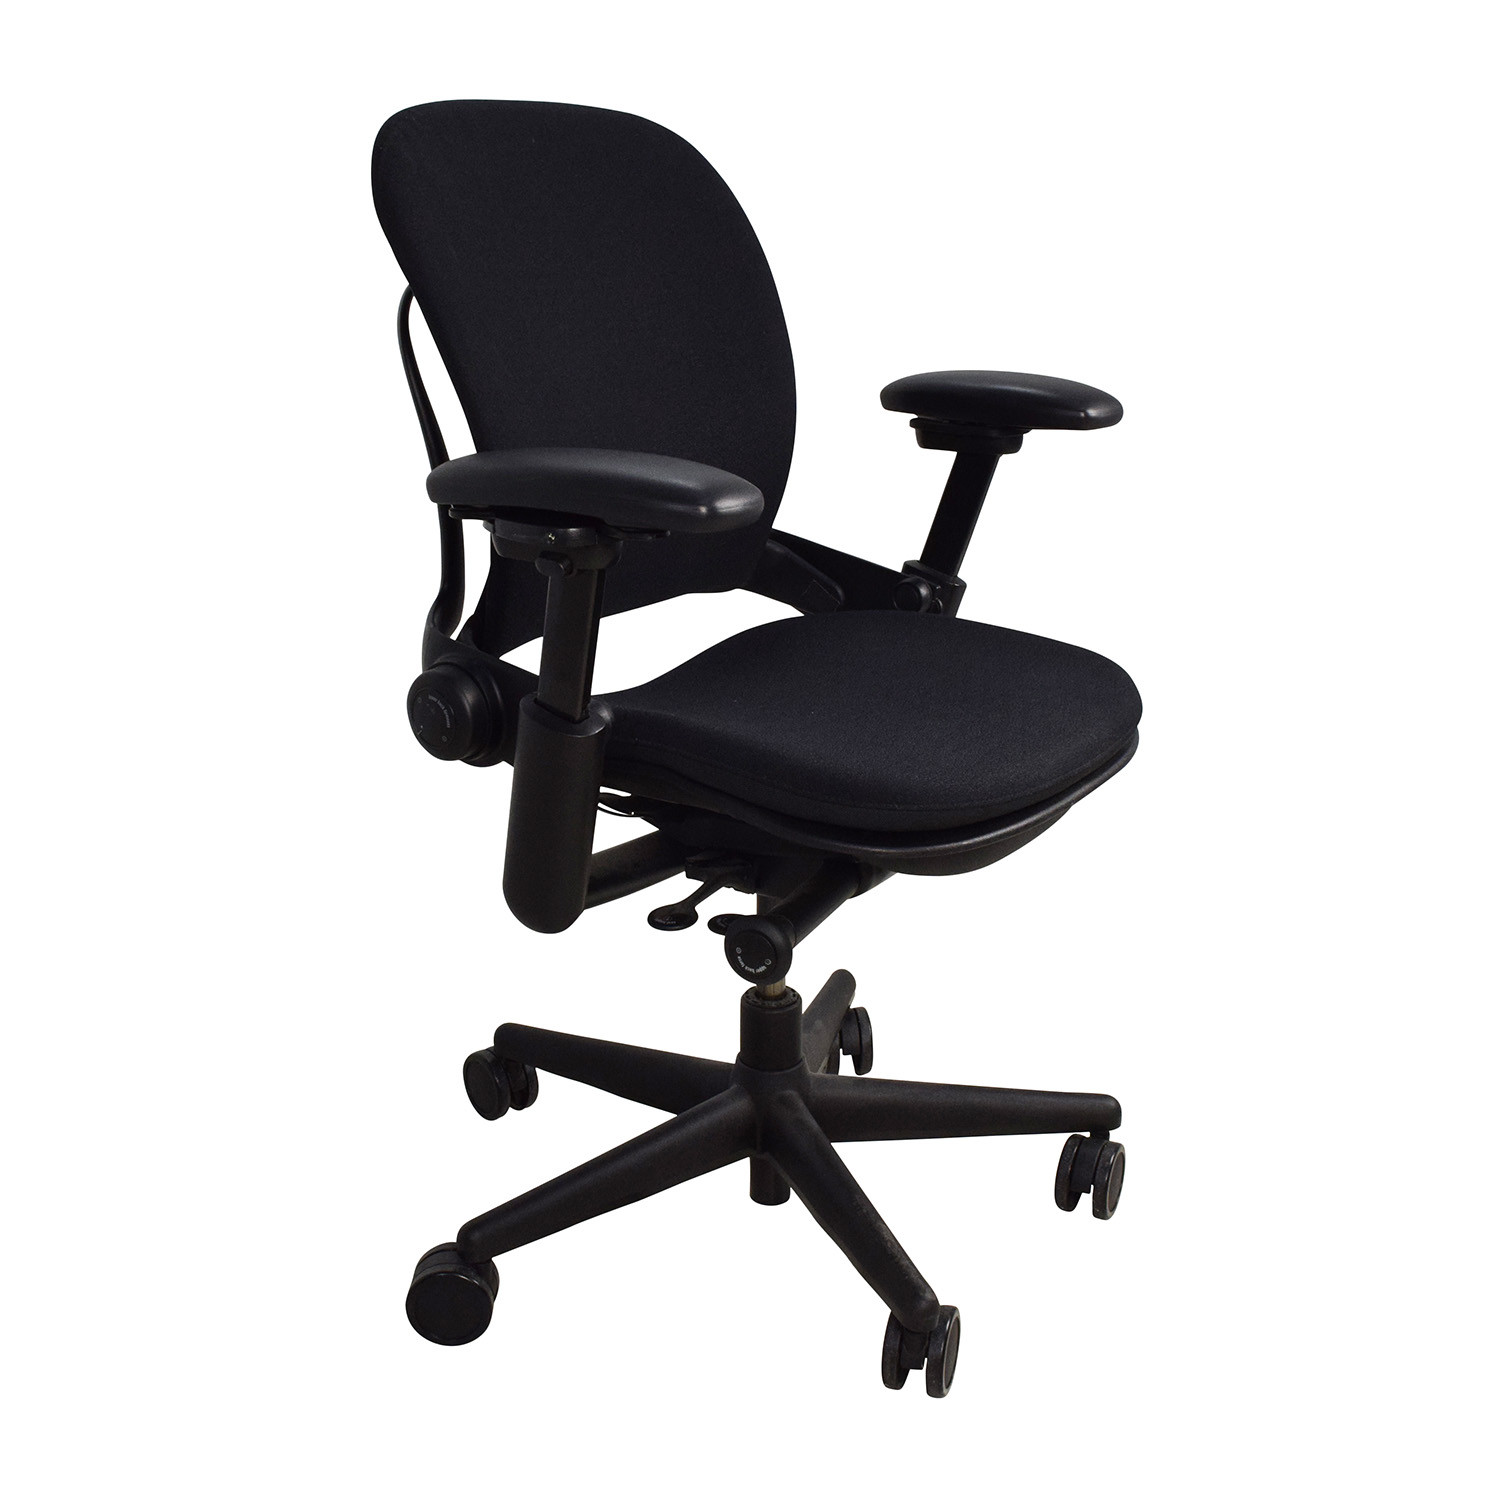 Best ideas about Office Desk Chair
. Save or Pin OFF Adjustable Black fice Desk Chair Chairs Now.